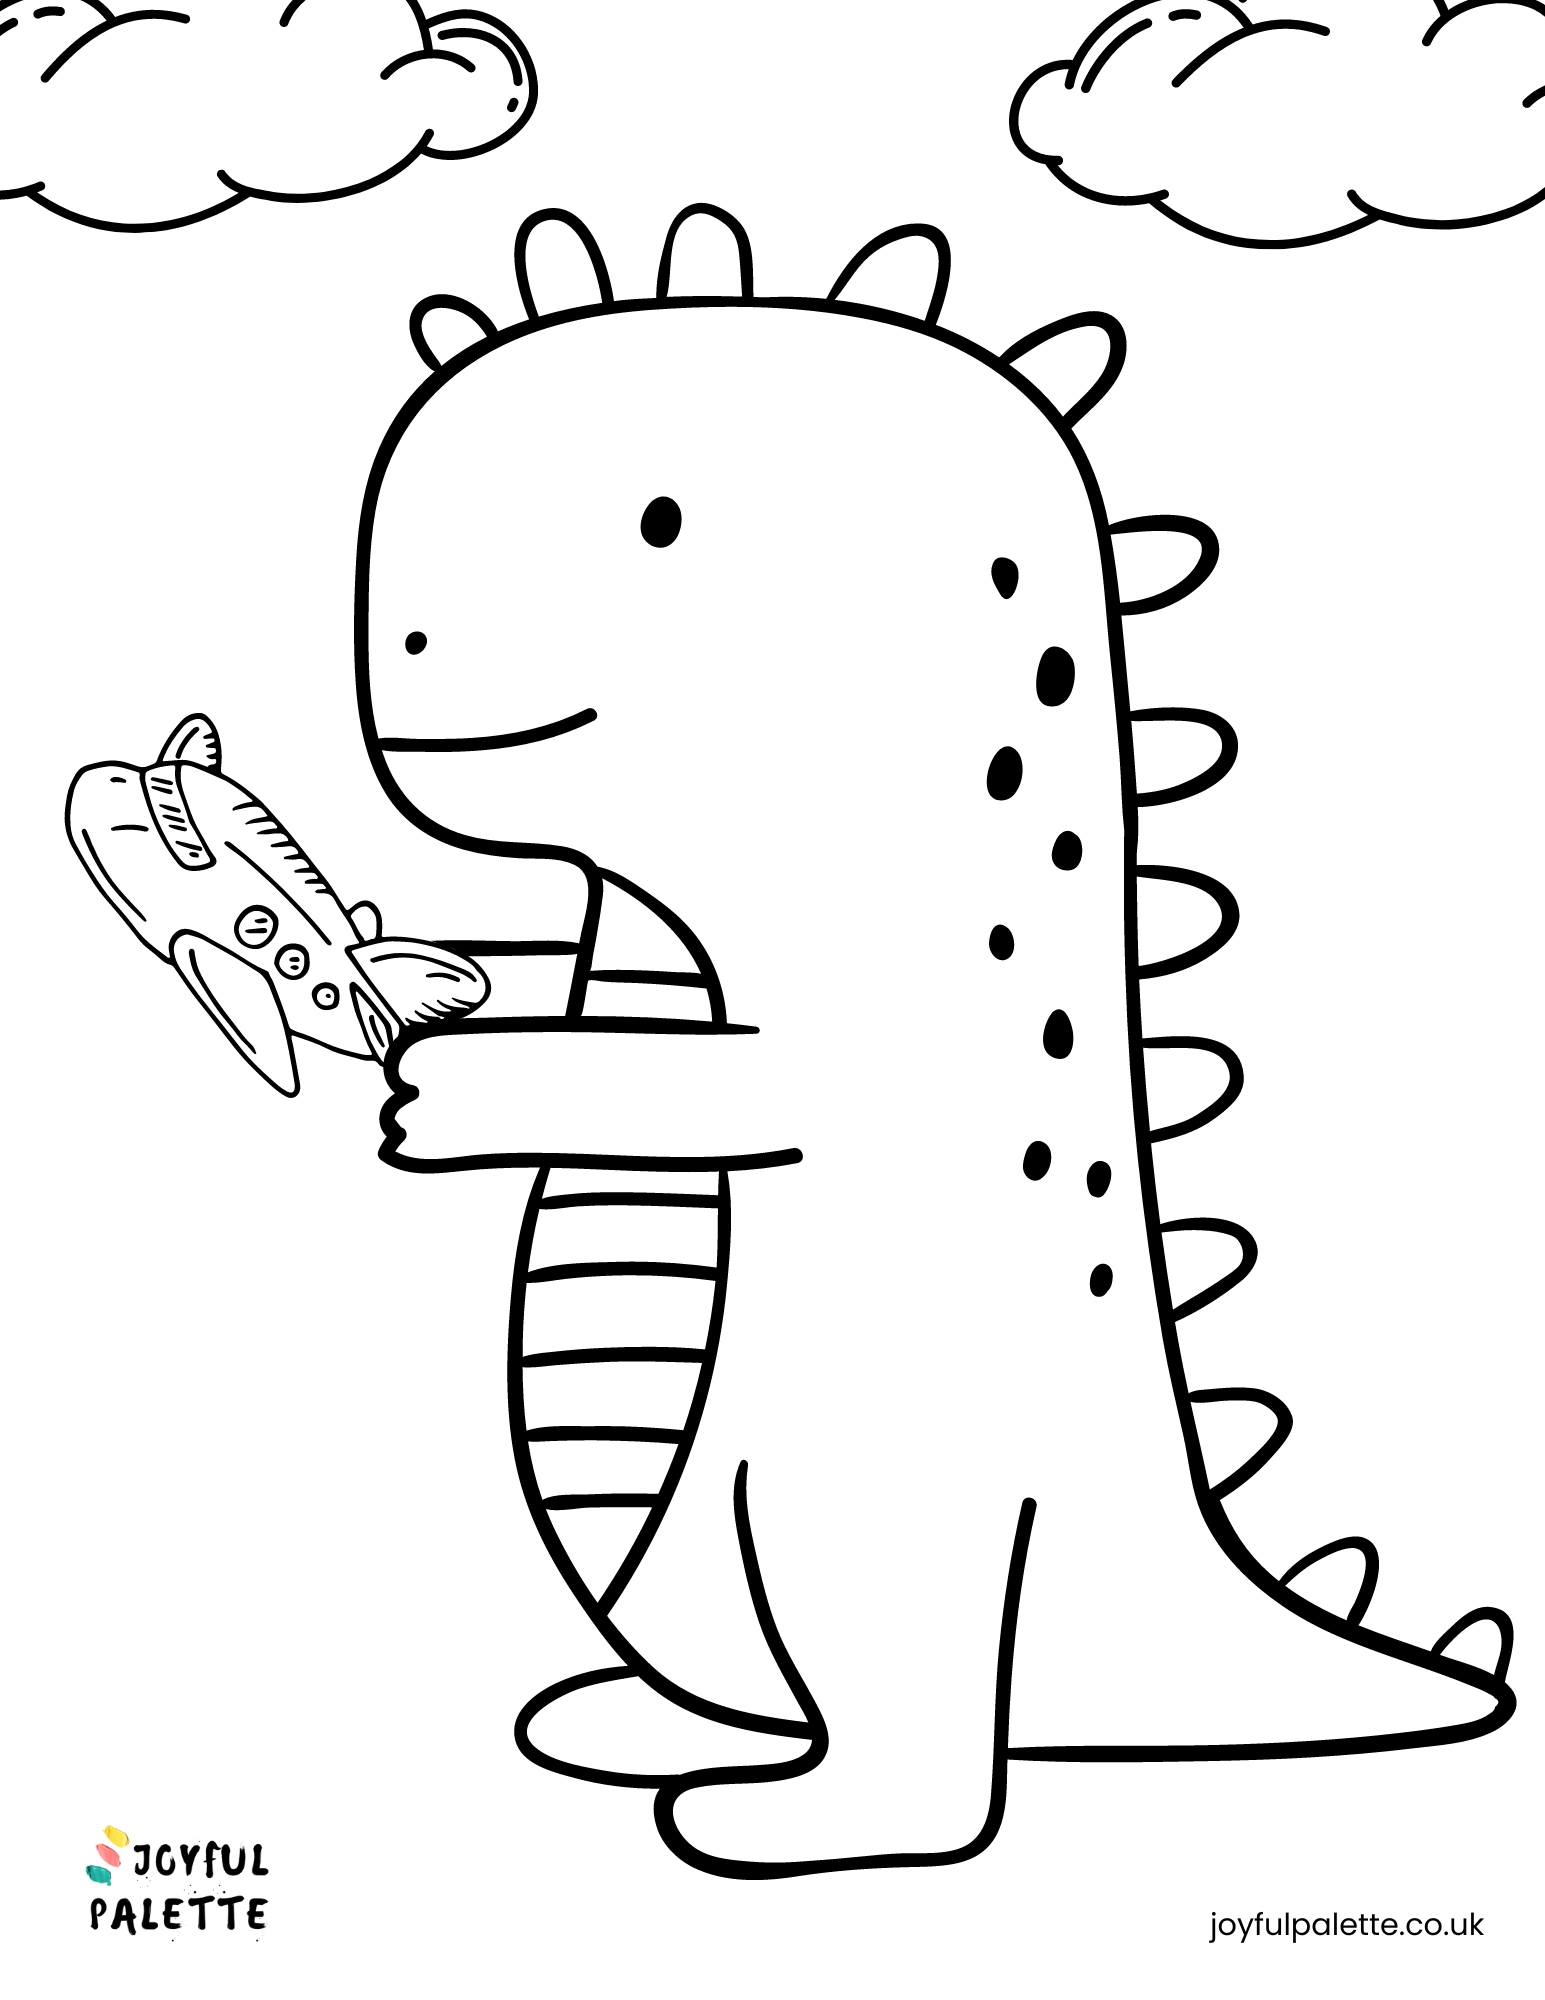 Dinosaur Coloring Pages for Preschoolers